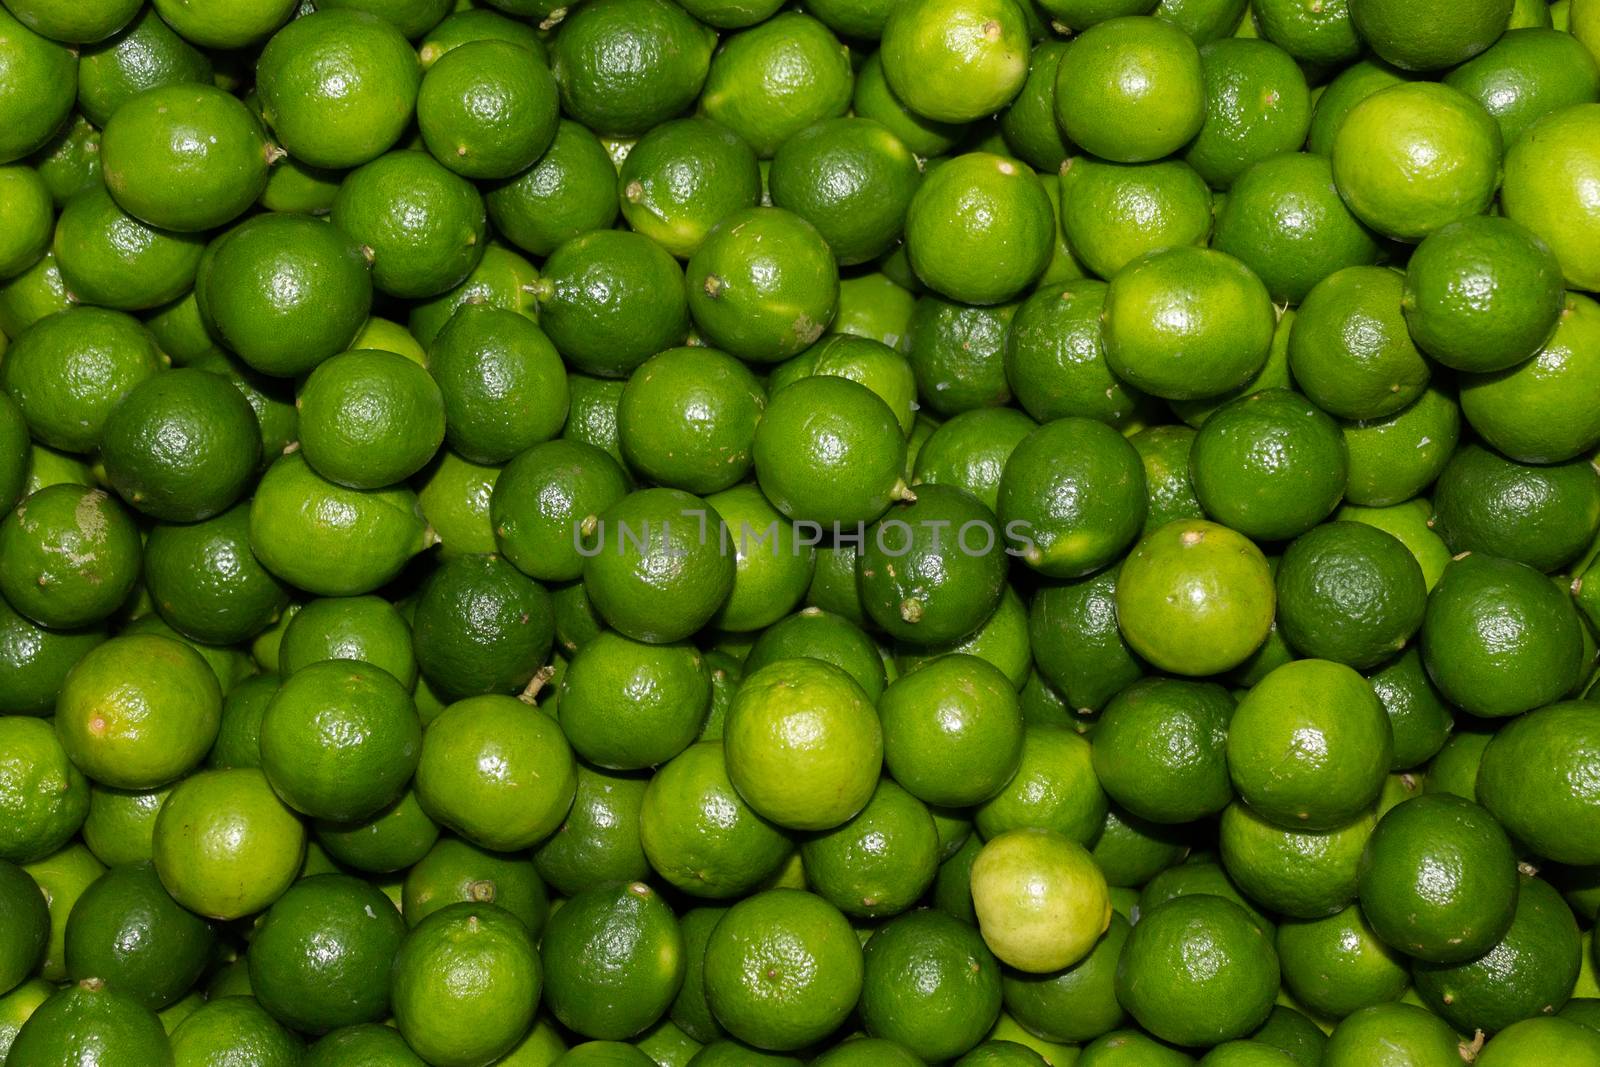 Fresh green lemons. textures and backgrounds